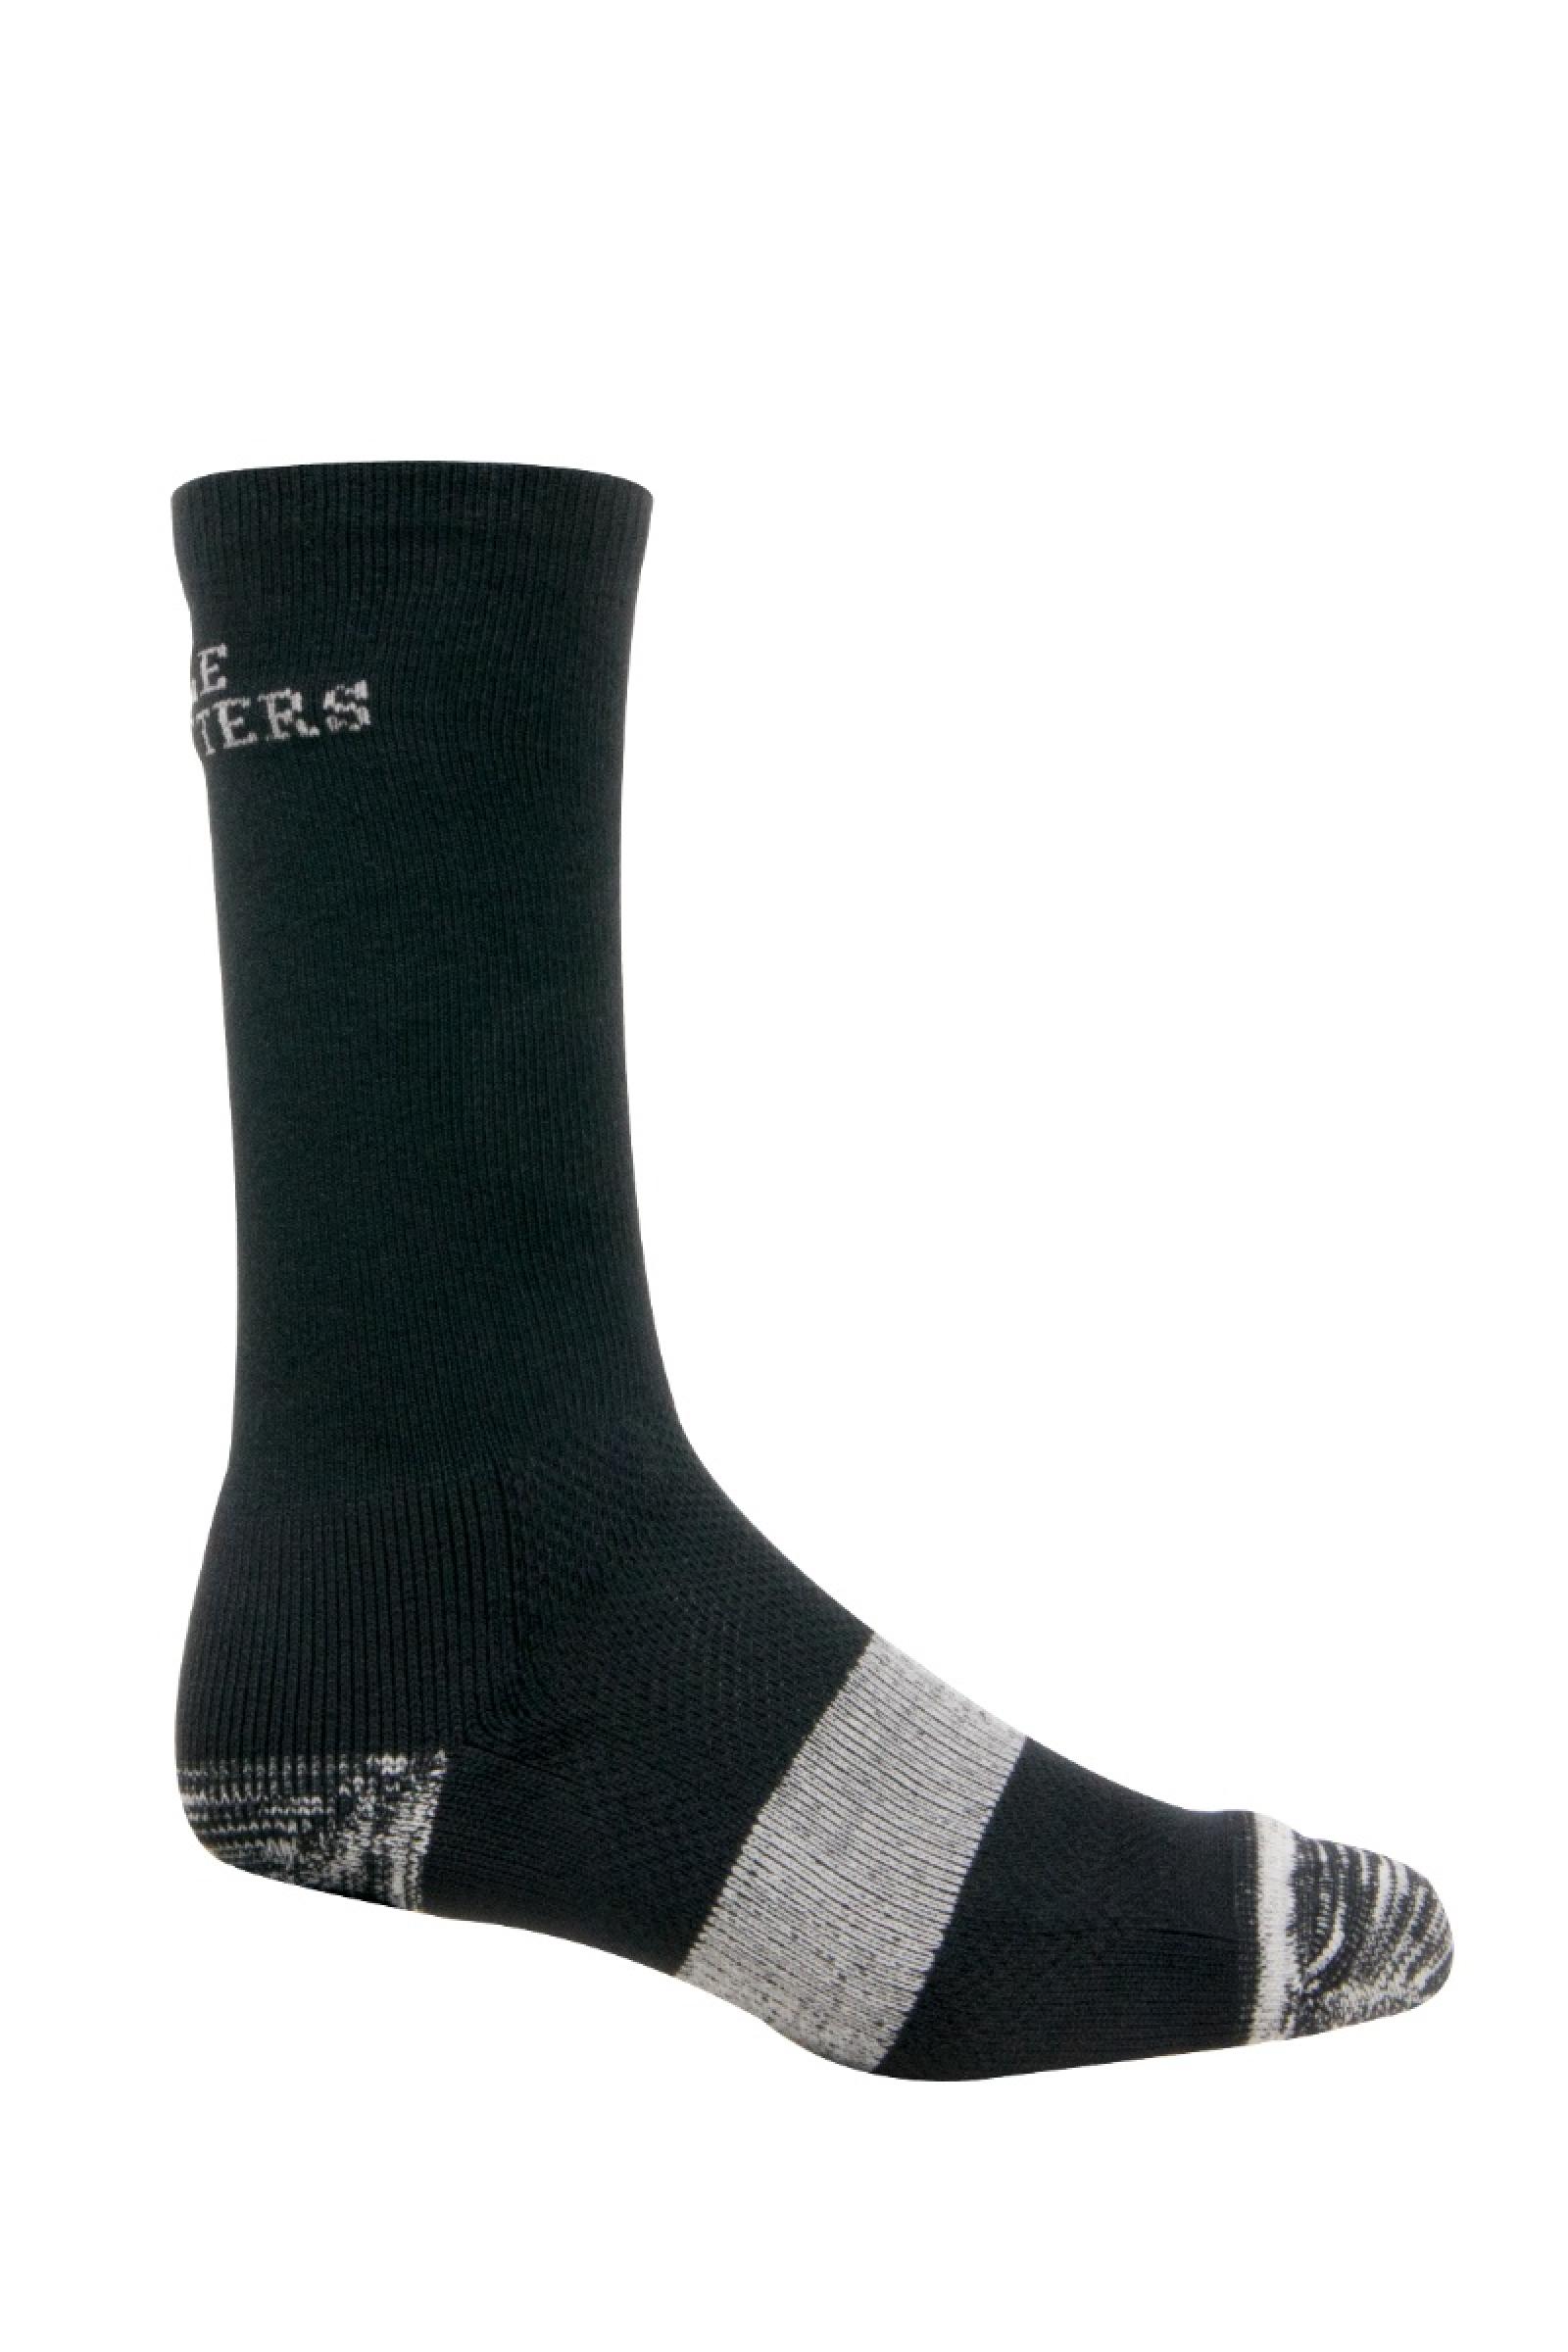 Noble Outfitters Best Dang Boot  Crew Sock